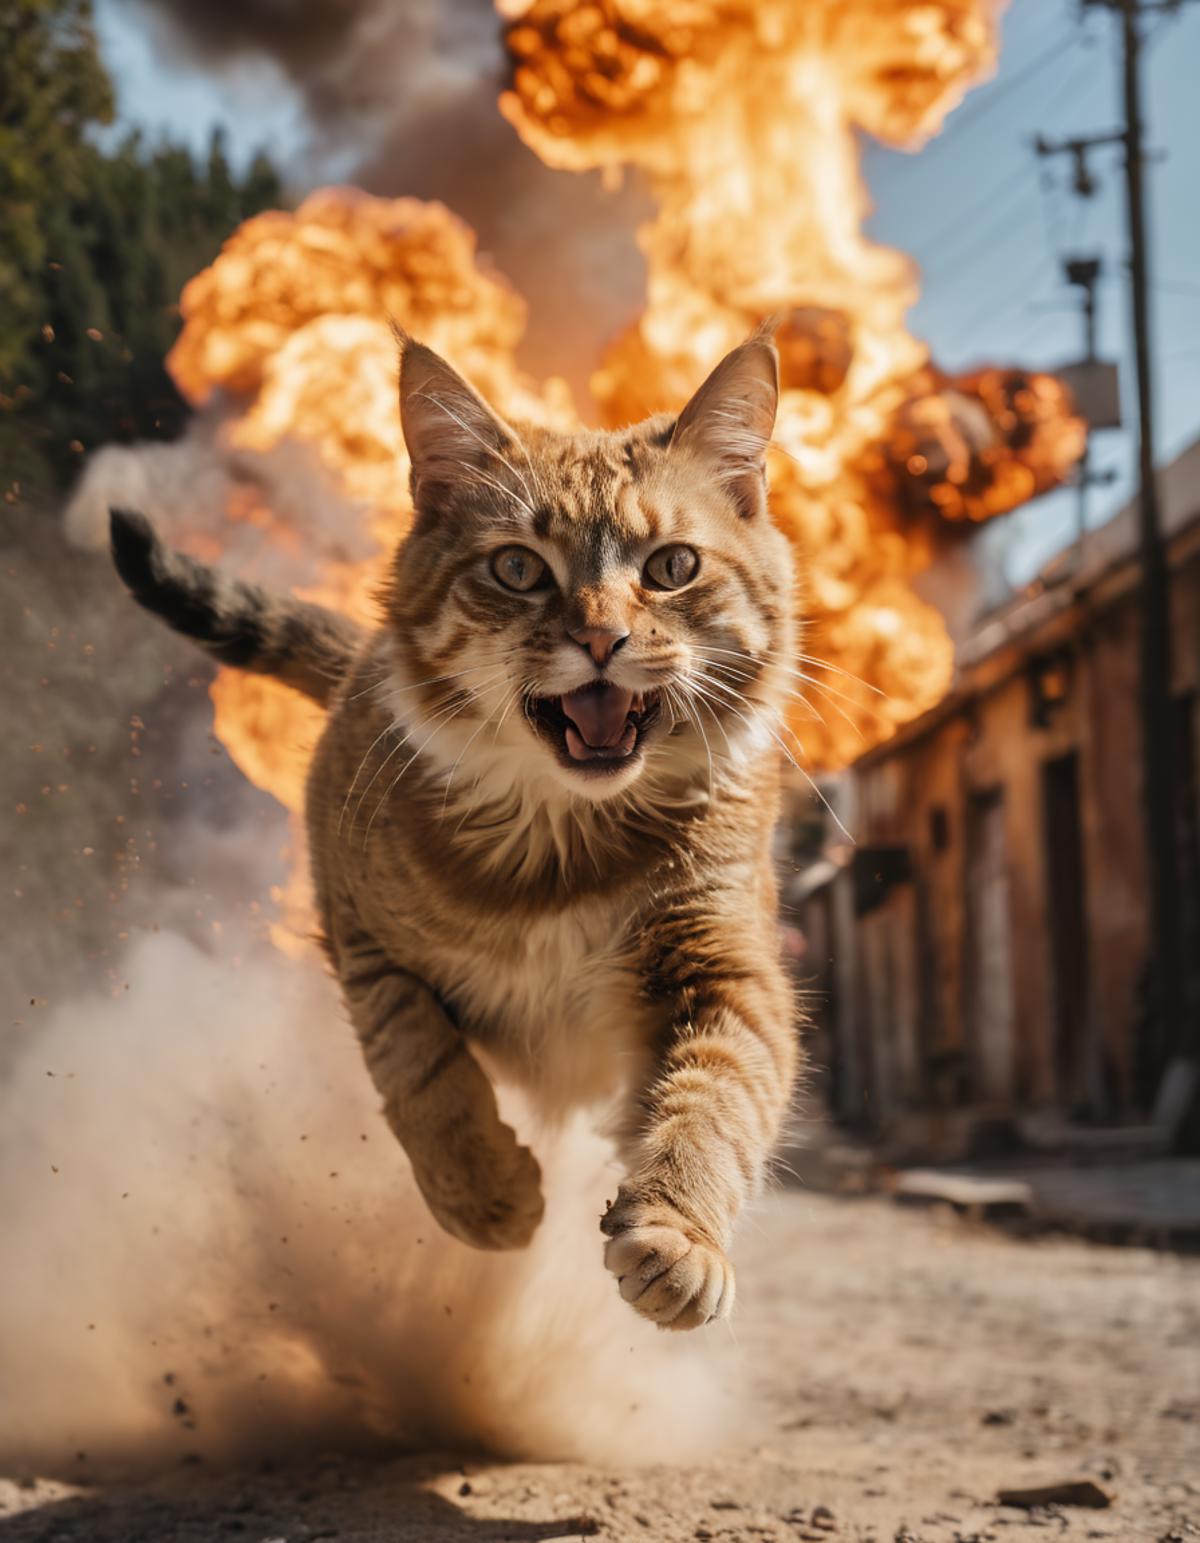 A cat running in the street with fire in the background.